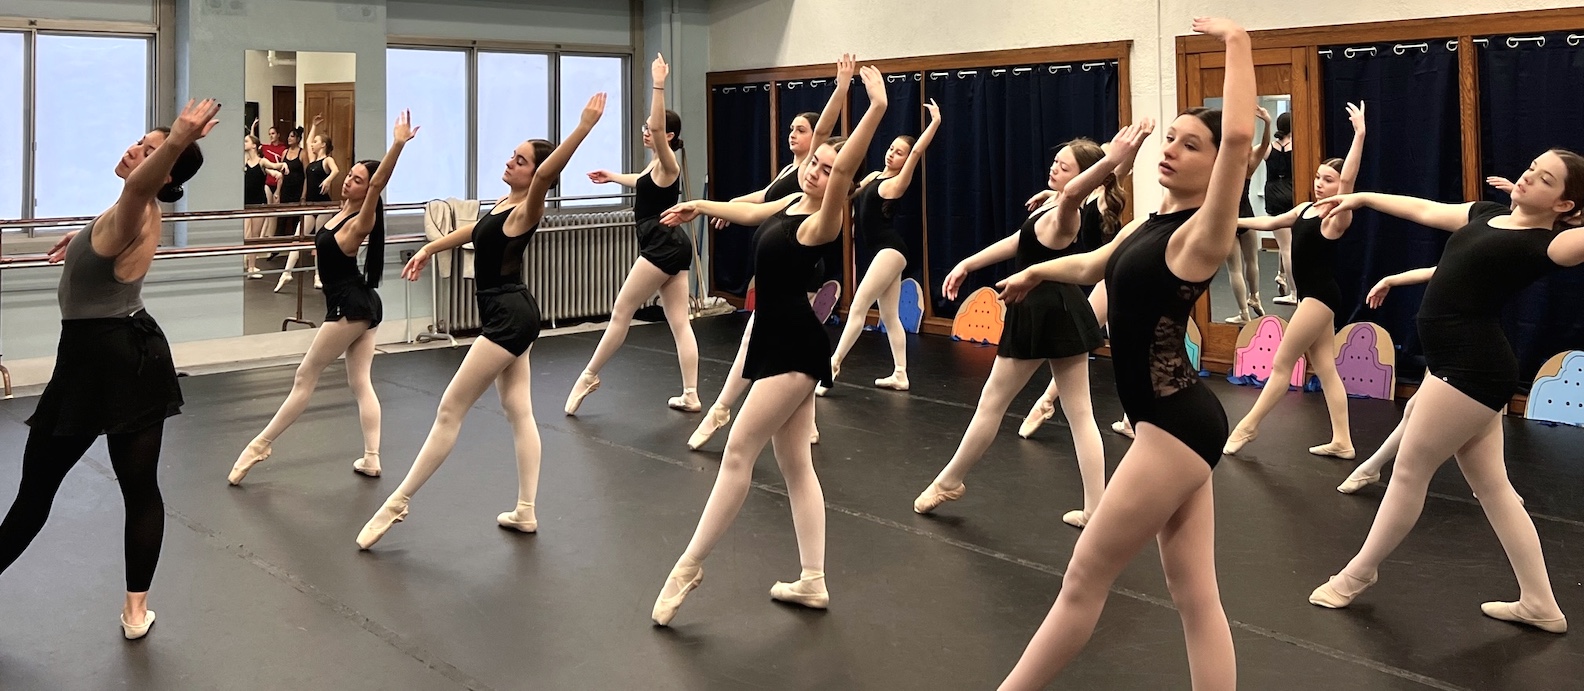 Greater Niagara Ballet Company dancers and teachers prepare for the spring `Silver & Snow` show at the Niagara Arts and Cultural Center. (Photos by Mark Yerger)